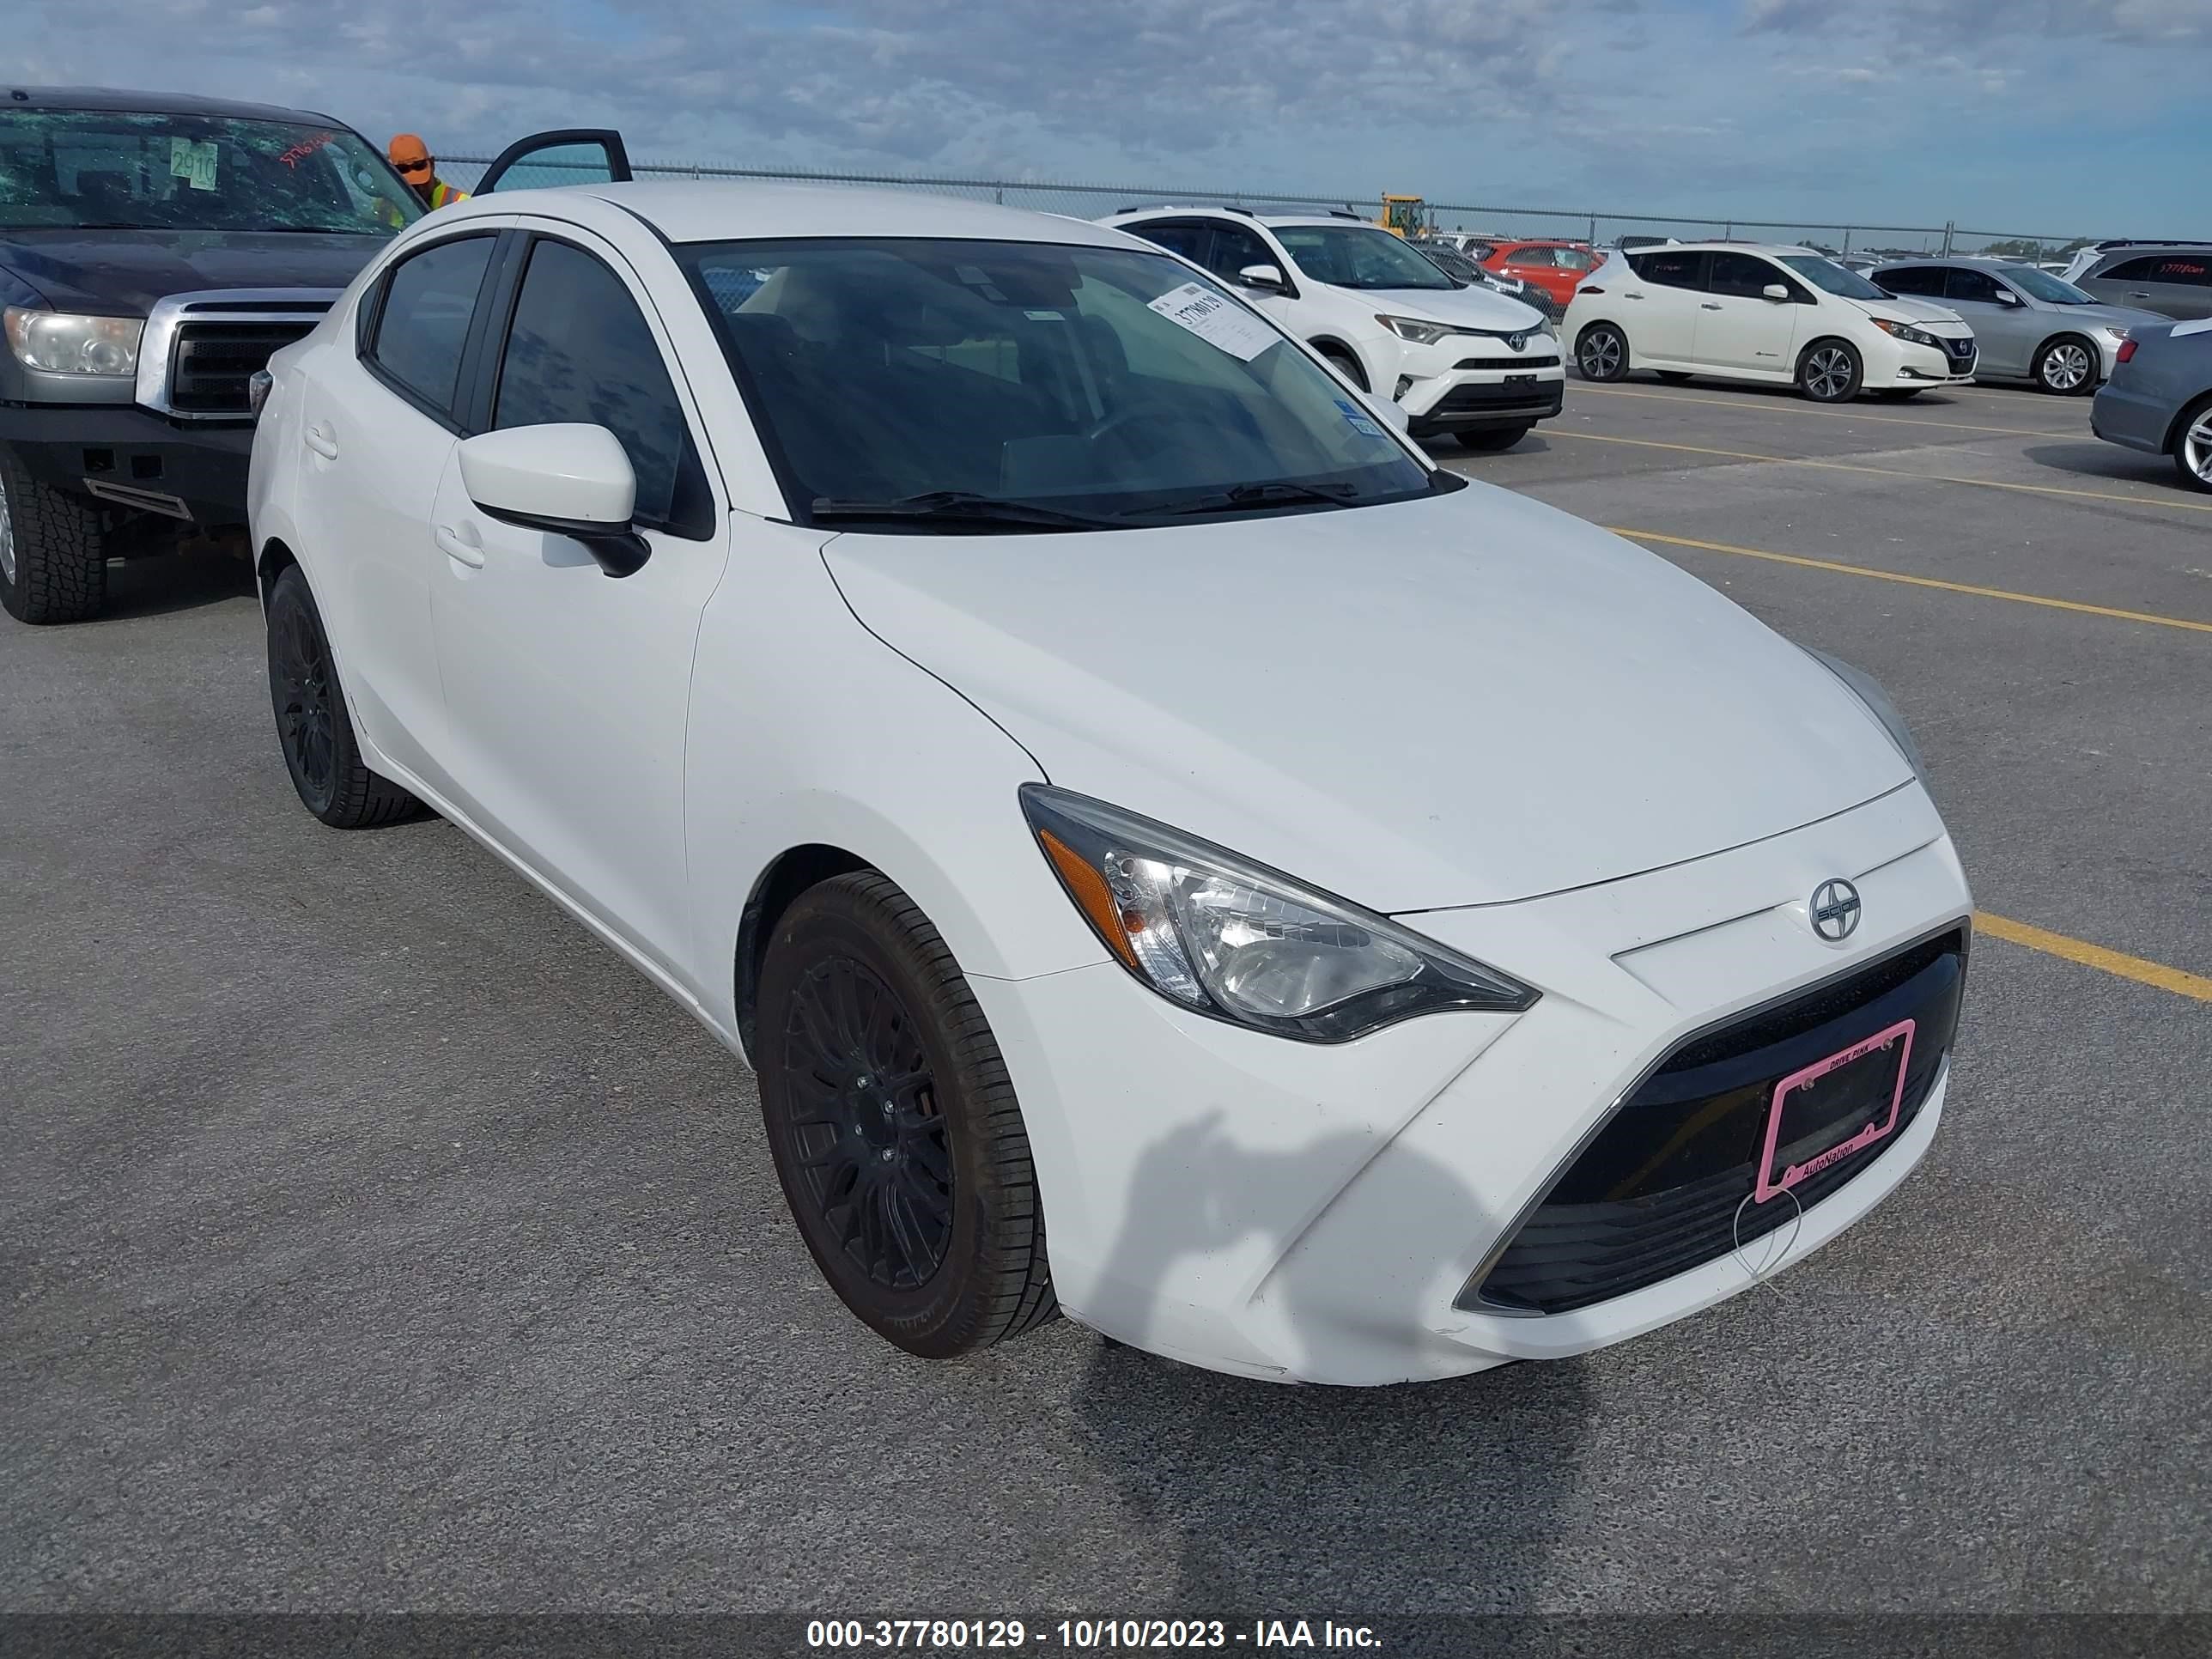 vin: 3MYDLBZVXGY131702 3MYDLBZVXGY131702 2016 scion ia 1500 for Sale in 76527, 23010 Firefly Rd, Florence, Texas, USA